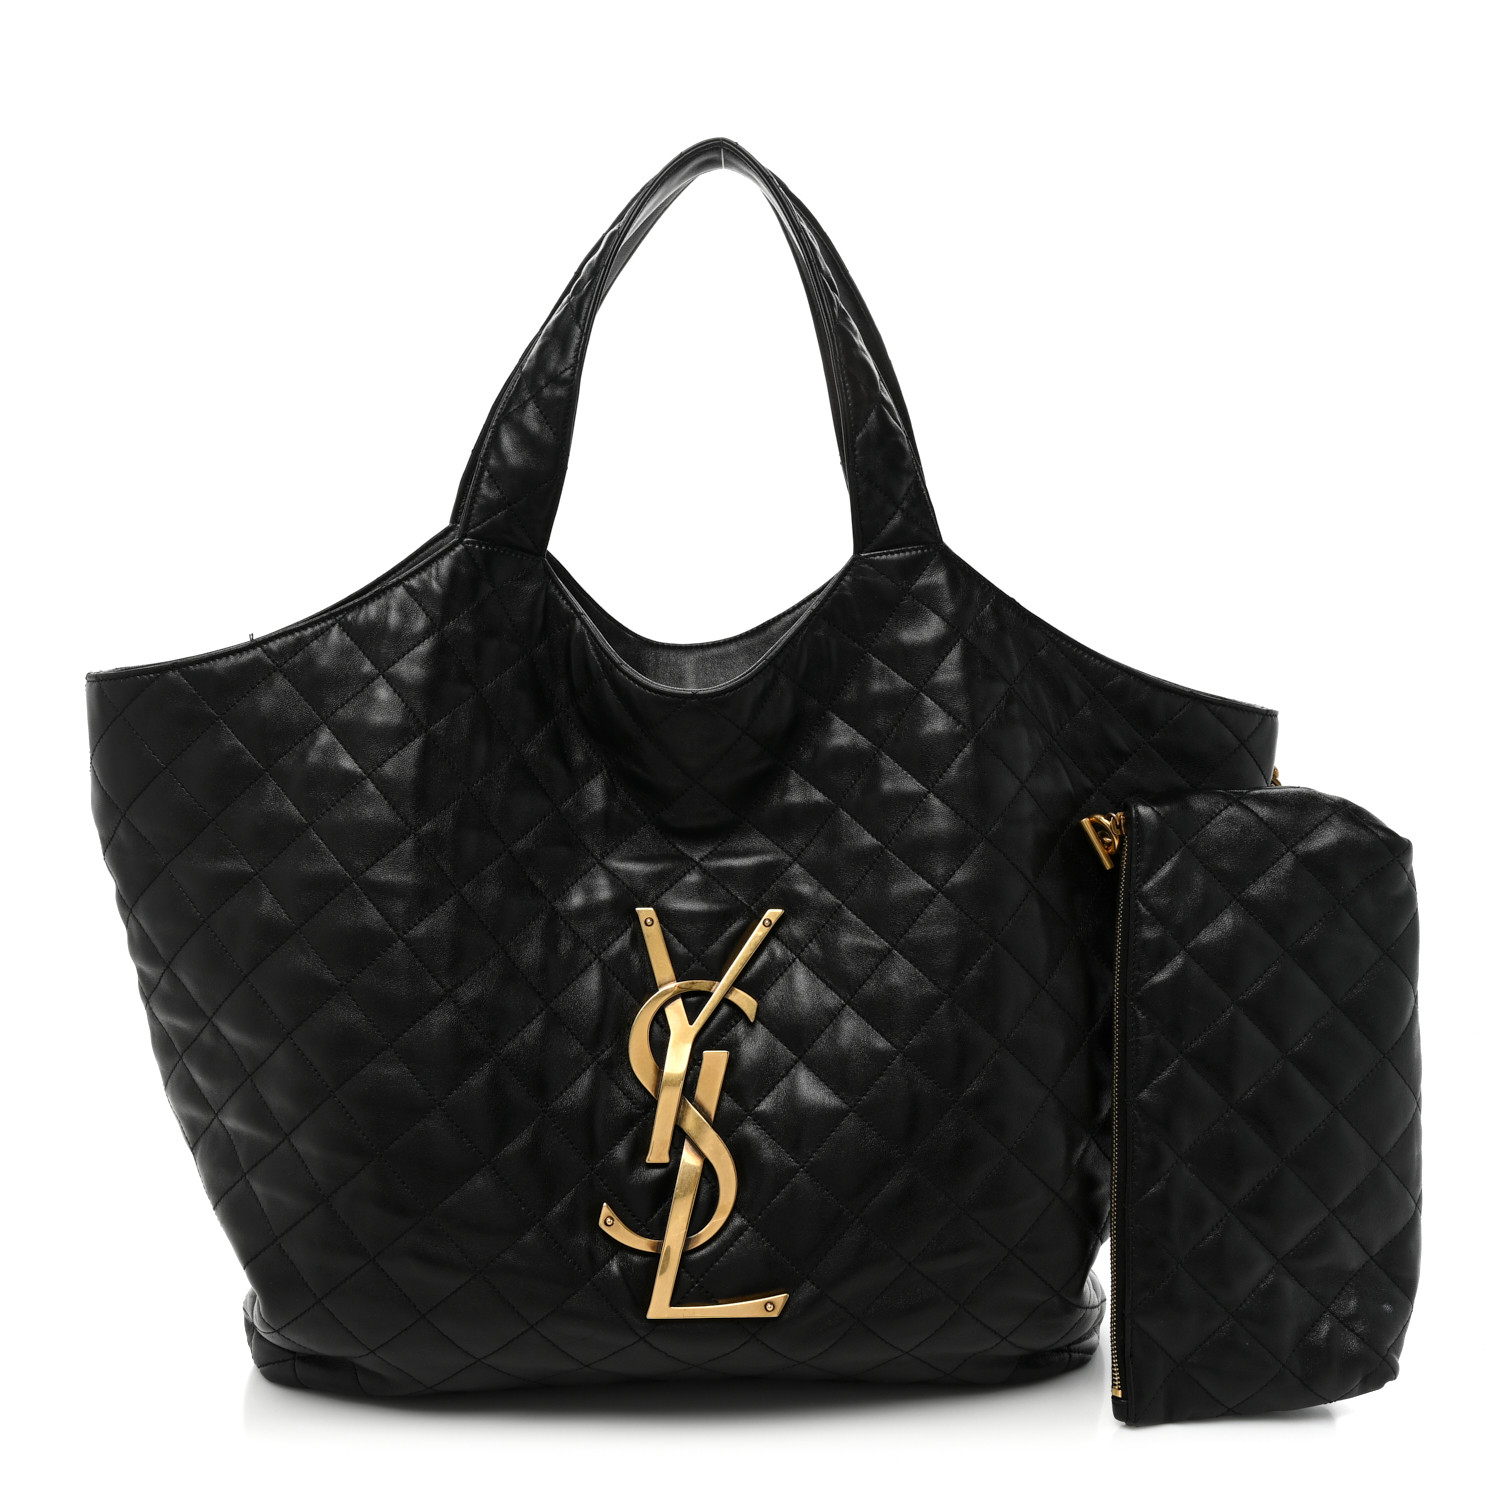 front view image of SAINT LAURENT Lambskin Quilted Maxi Icare Shopping Tote in the color Black by FASHIONPHILE